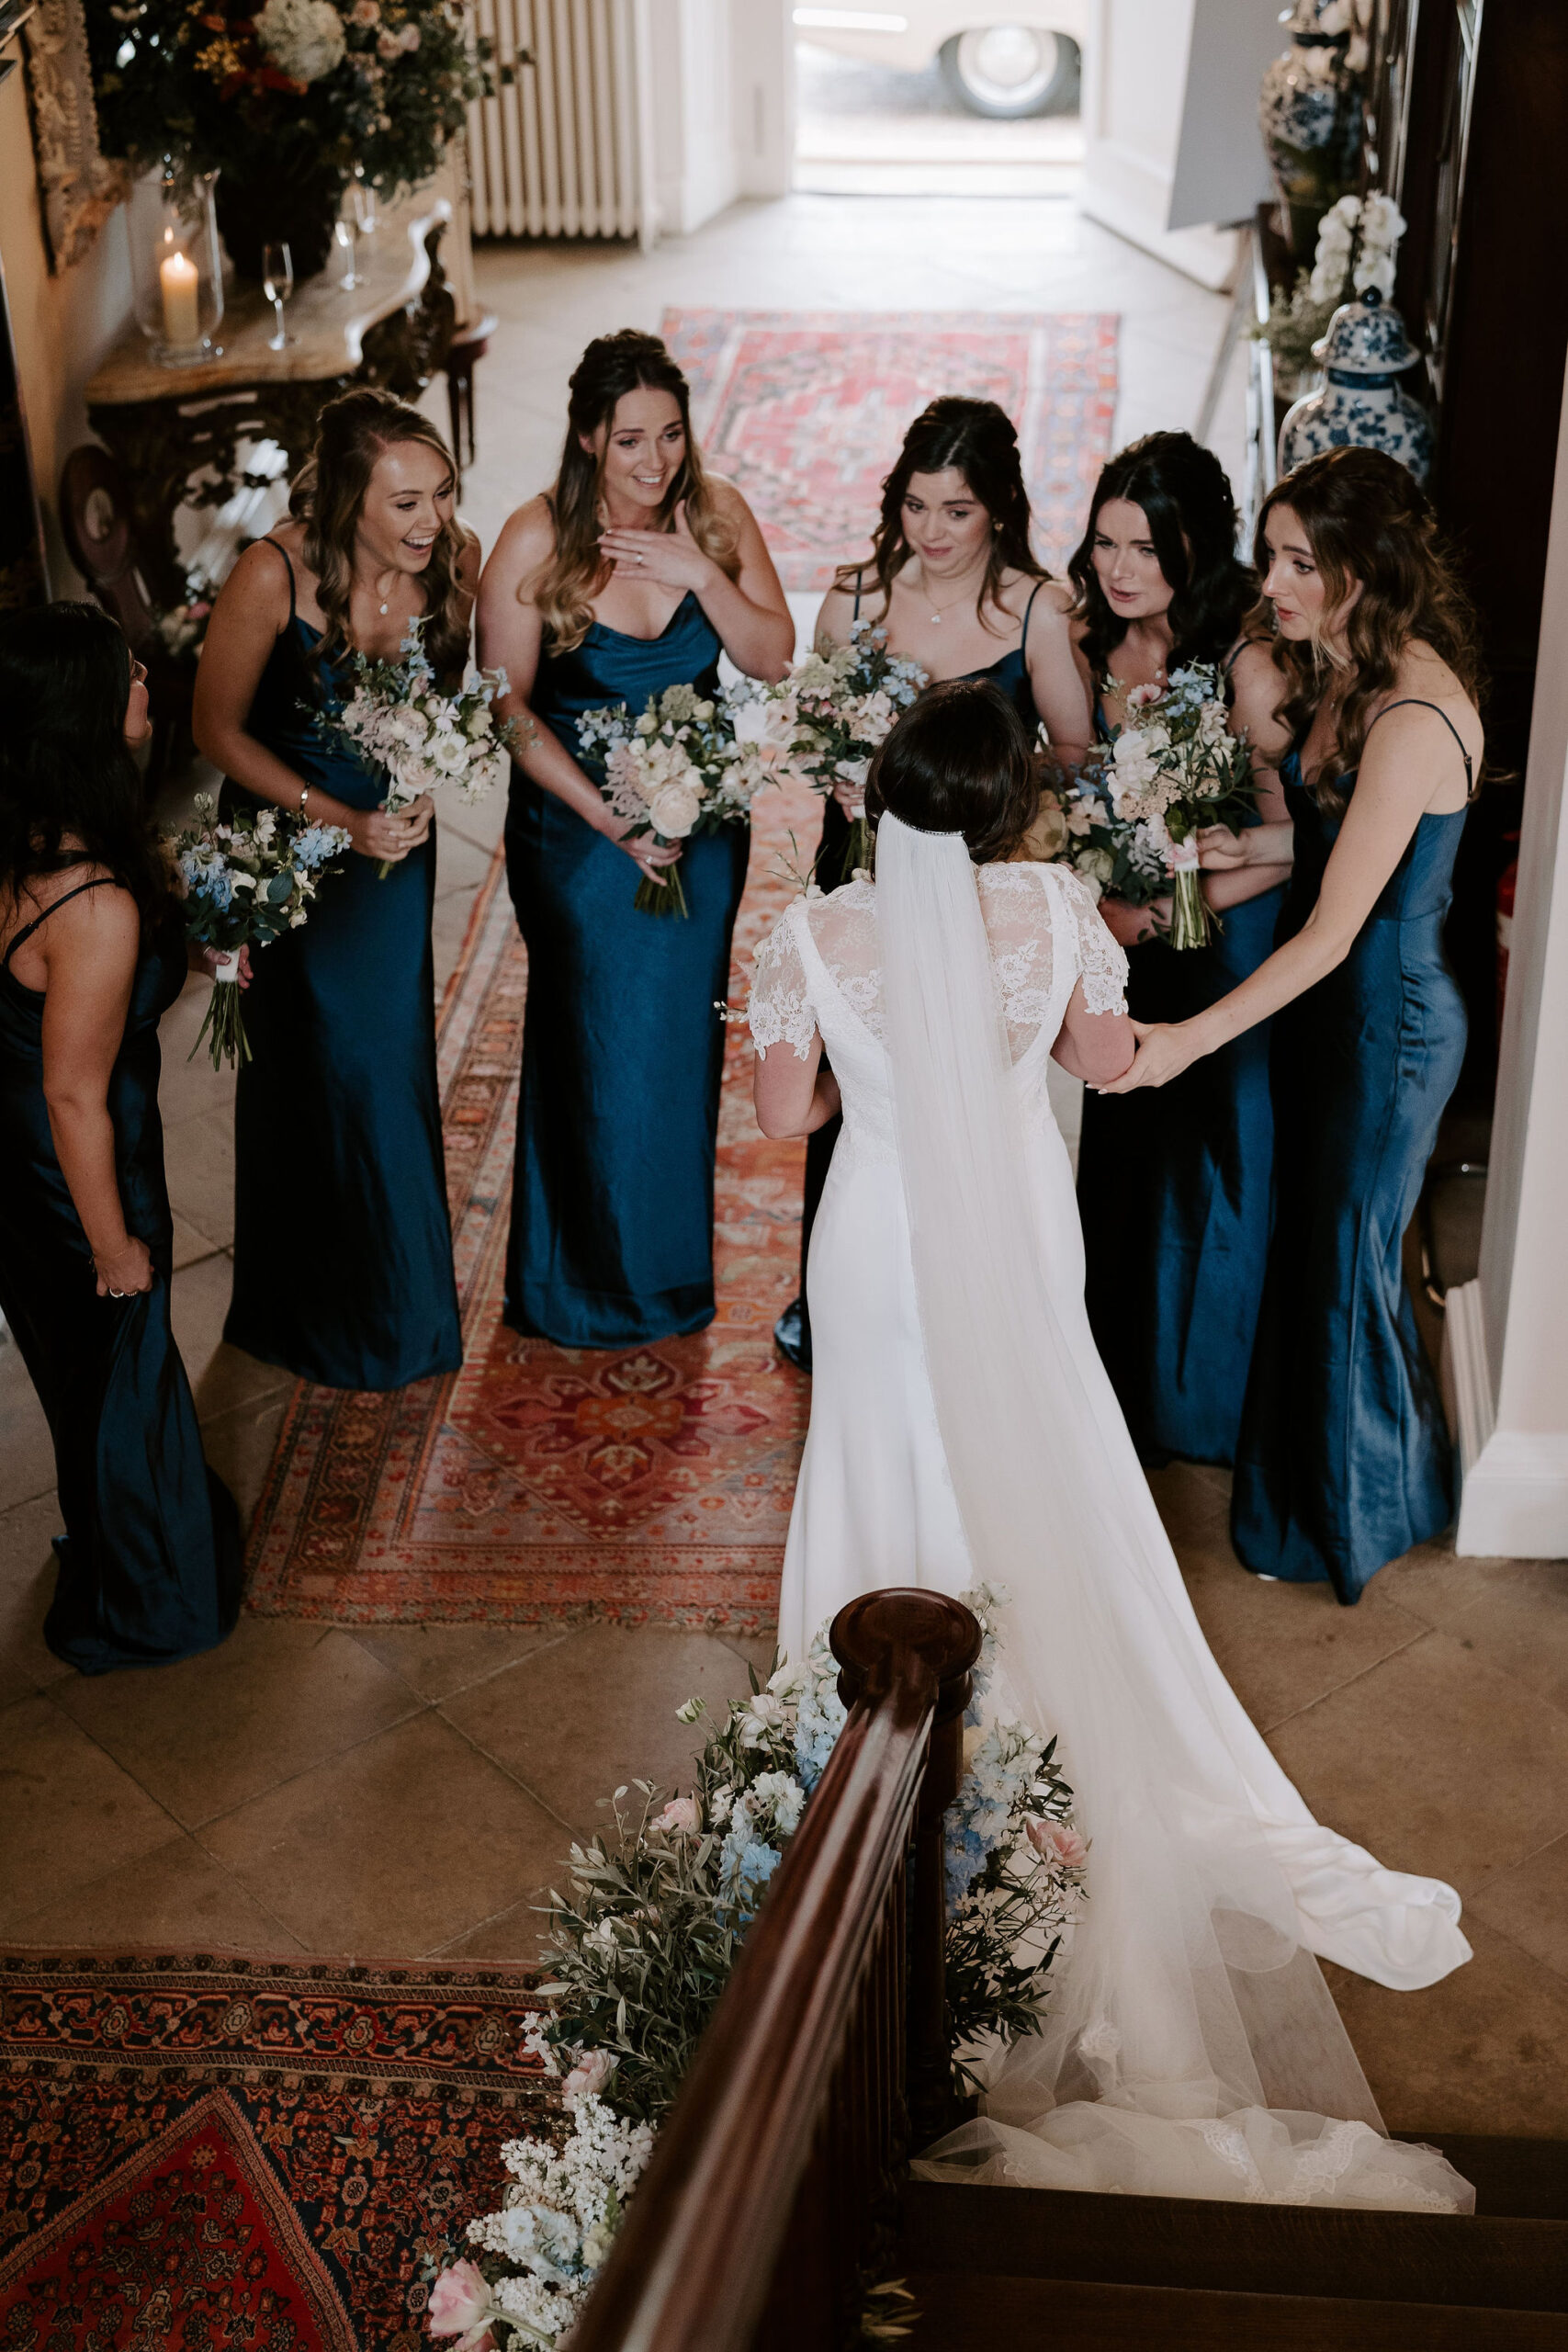 A view looking down onto a bride and her six bridesmaids gathering around her